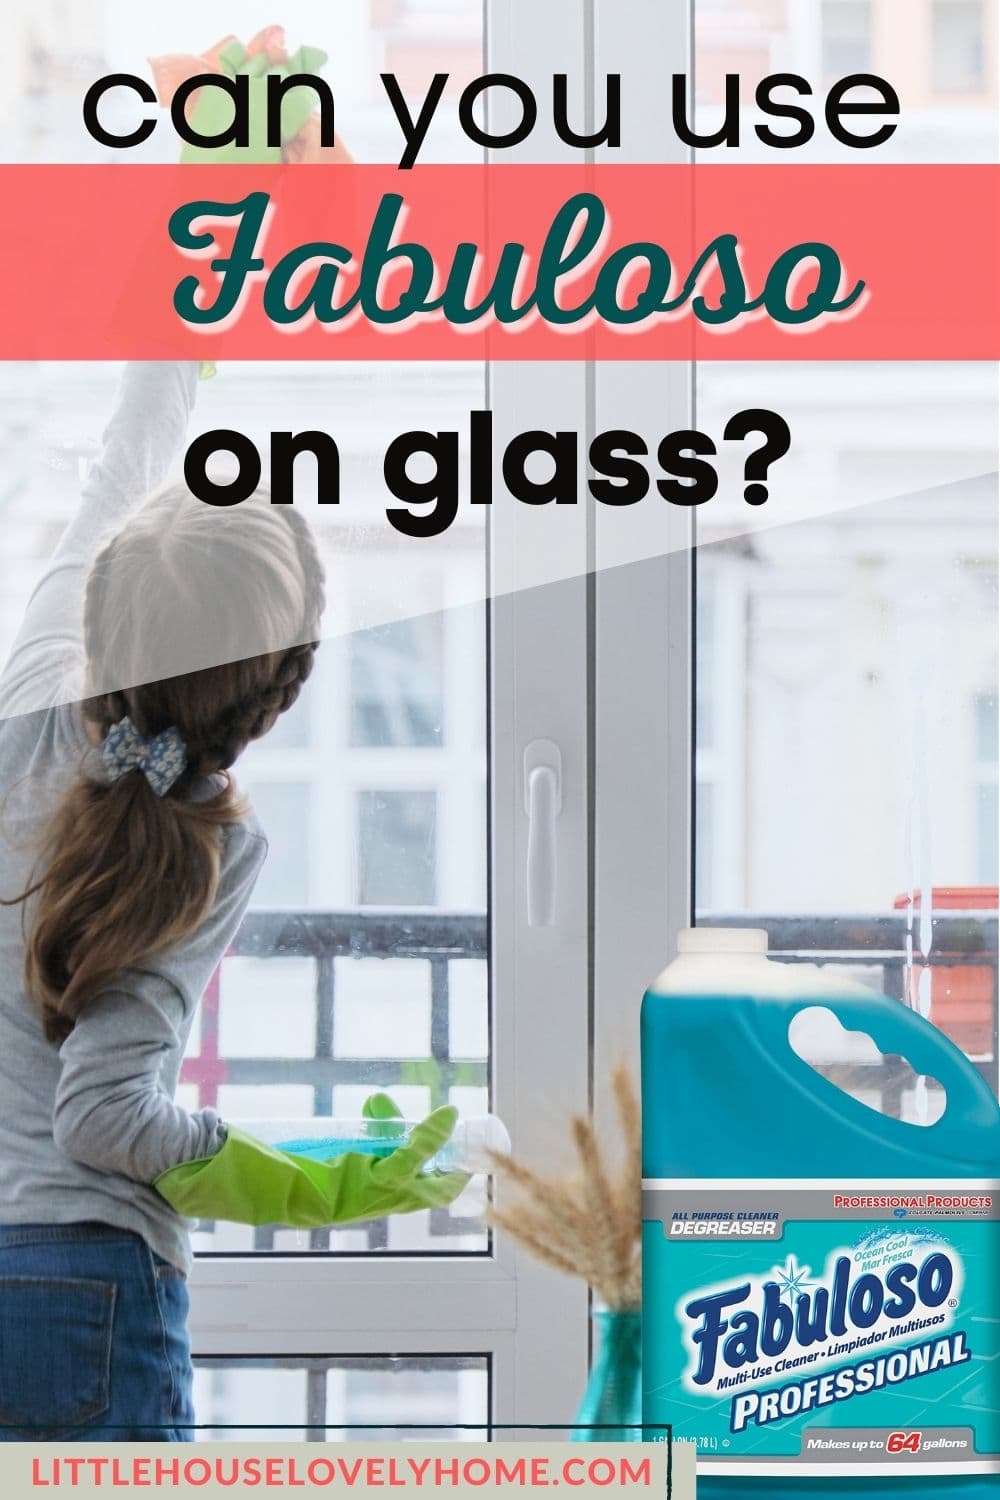 Image showing a person cleaning a glass window with a gallon of fabuloso and a text overlay that reads Can you use Fabuloso on glass